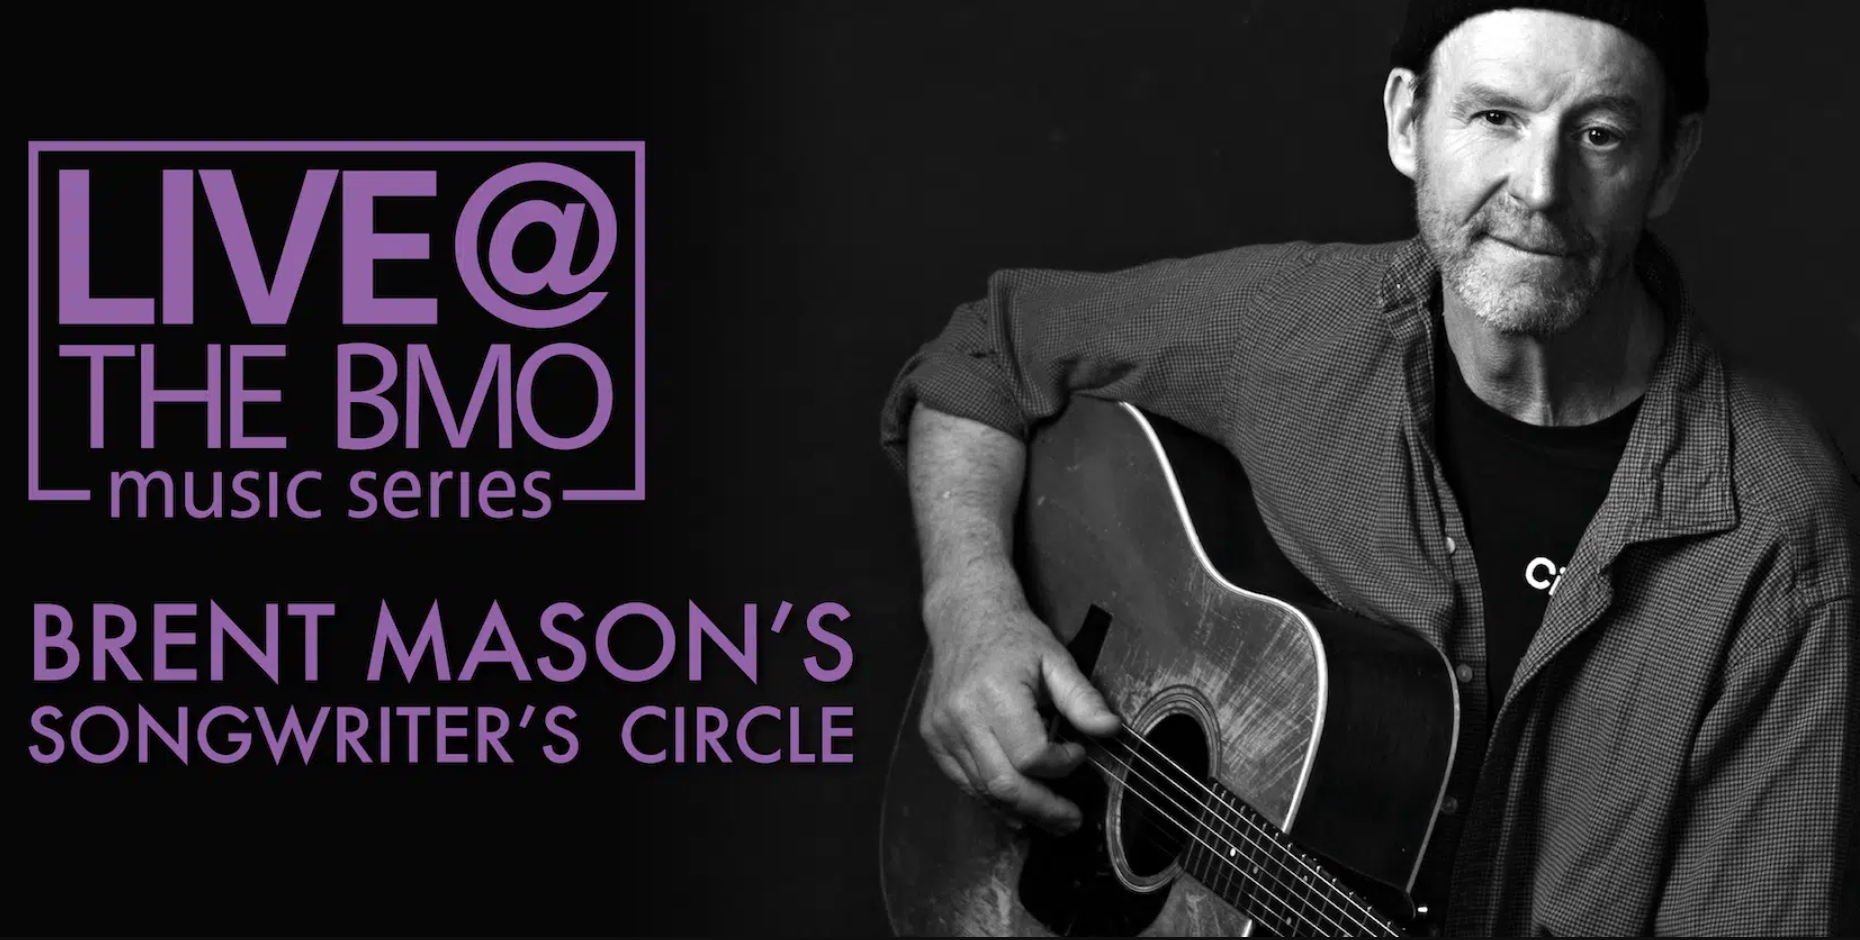 Picture of Brent Mason with his guitar. Text reads: Live at the BMO Music Series. Brent Mason's Songwriter's Circle.